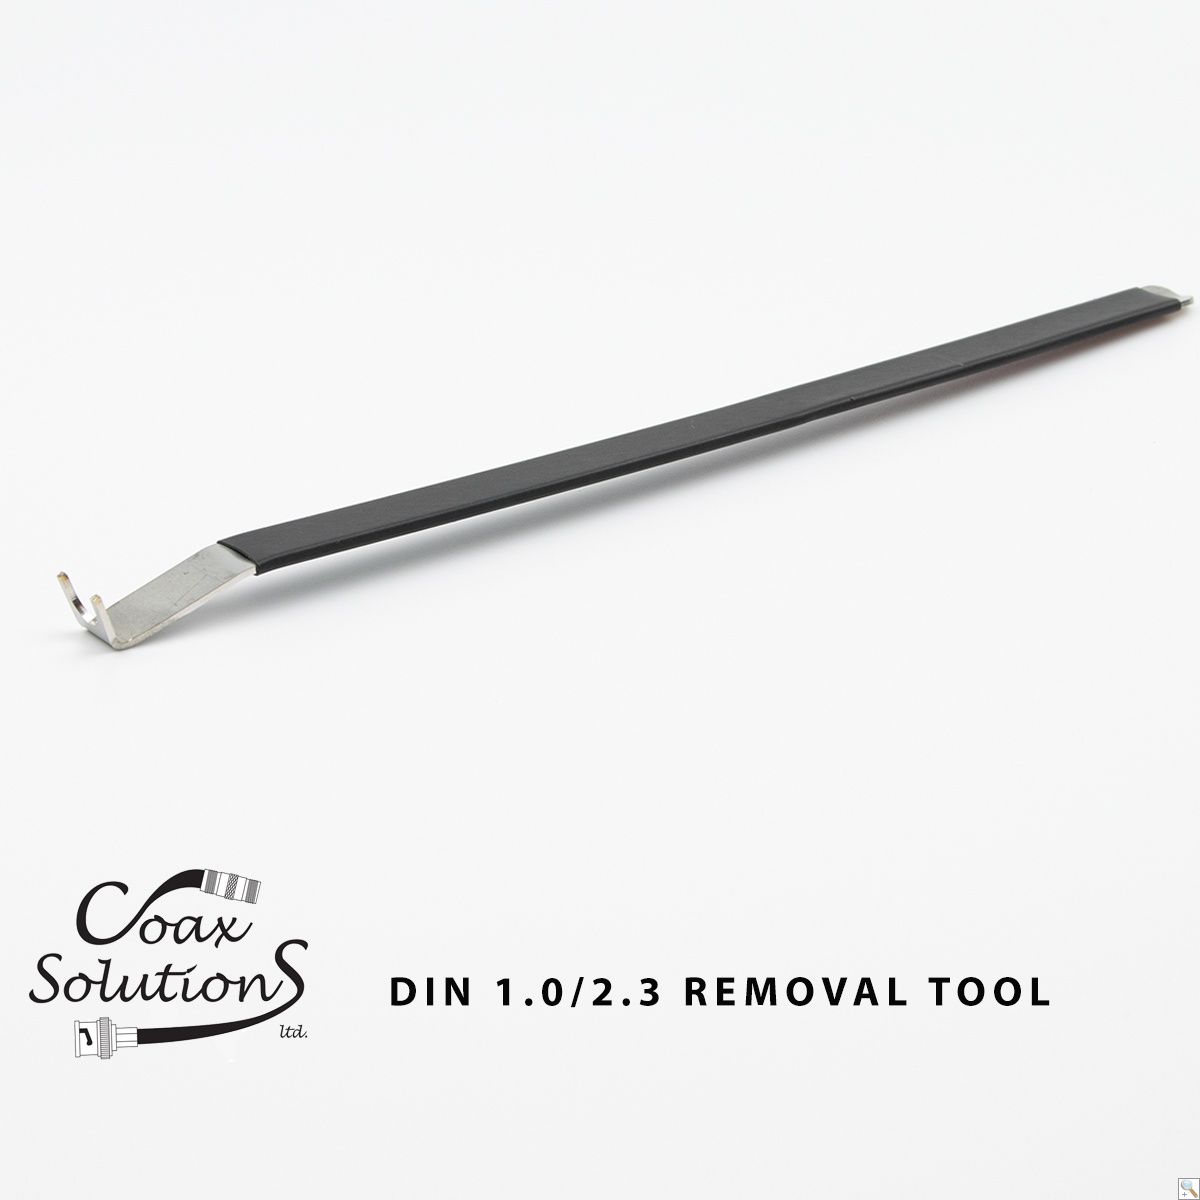 DIN 1.0/2.3 Removal/Extraction tool